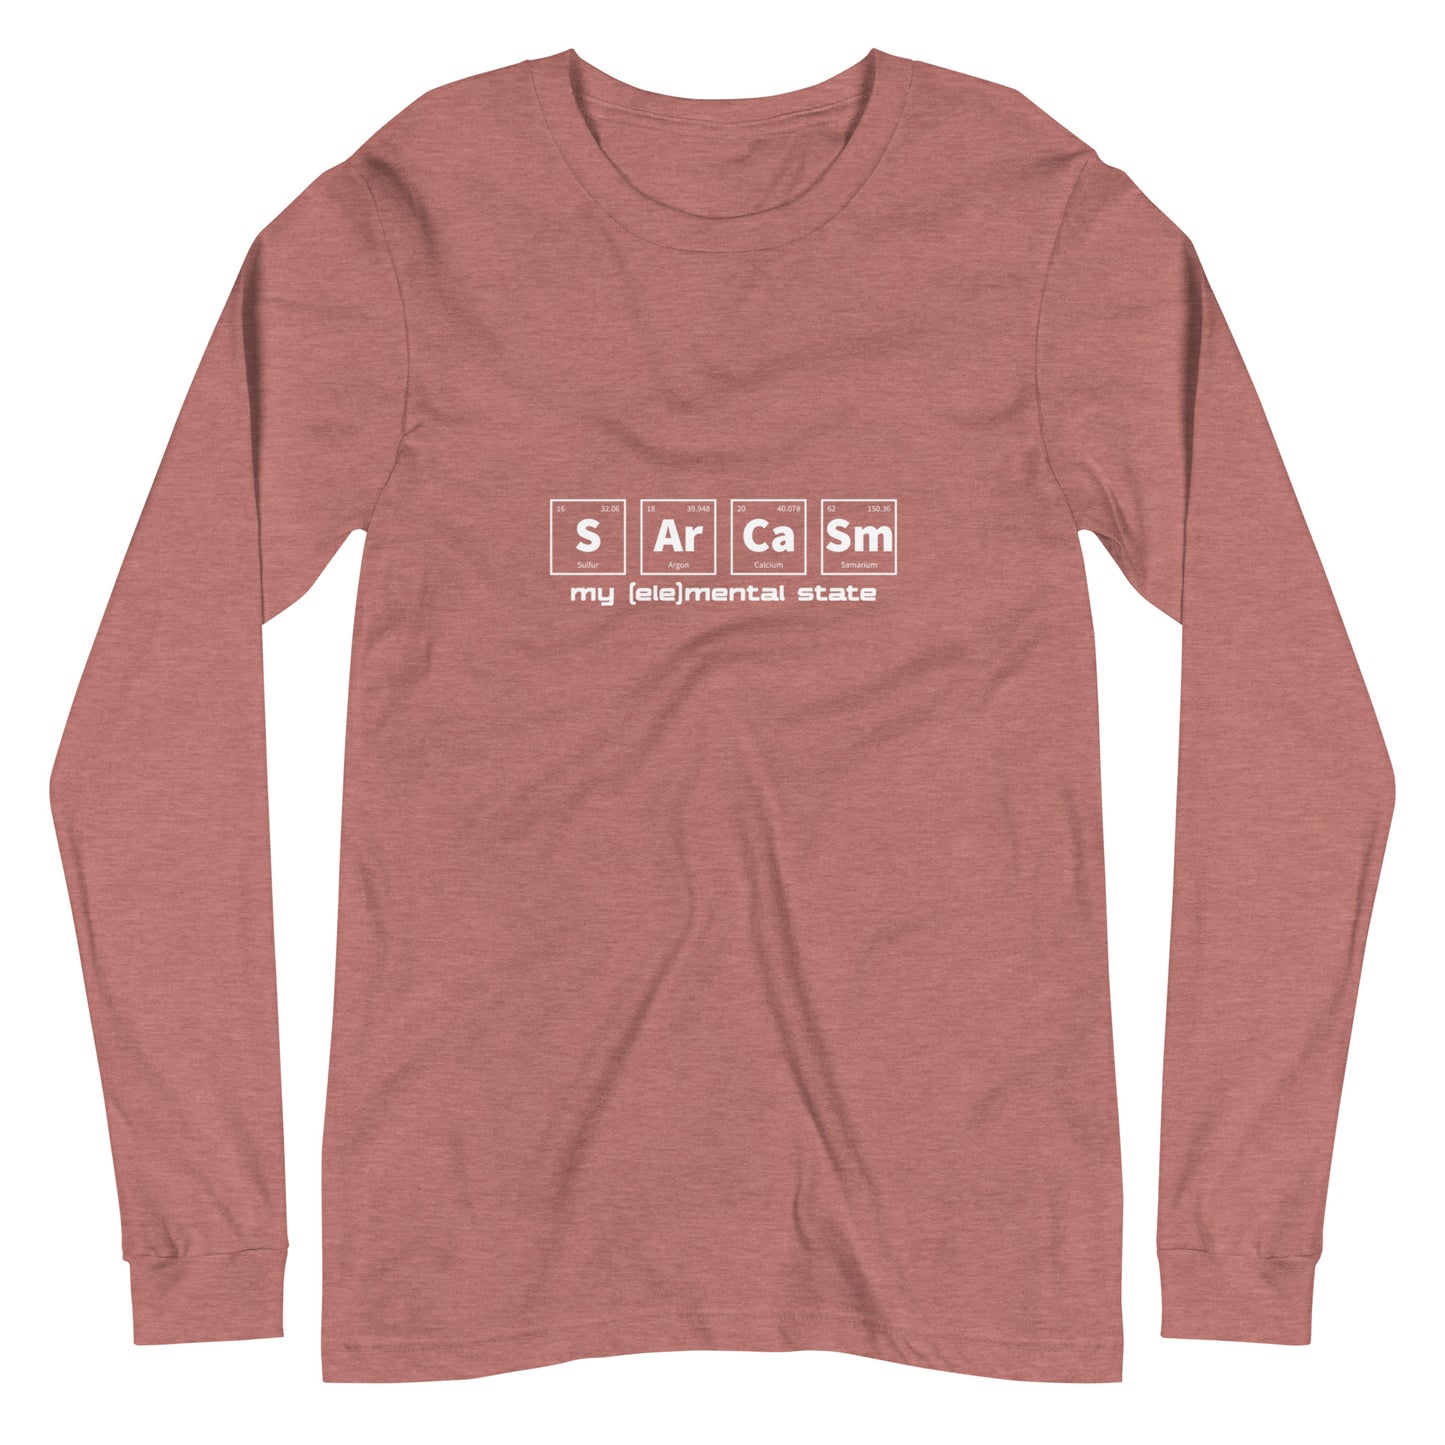 Heather Mauve long sleeve t-shirt with graphic of periodic table of elements symbols for Sulfur (S), Argon (Ar), Calcium (Ca), and Samarium (Sm) and text "my (ele)mental state"